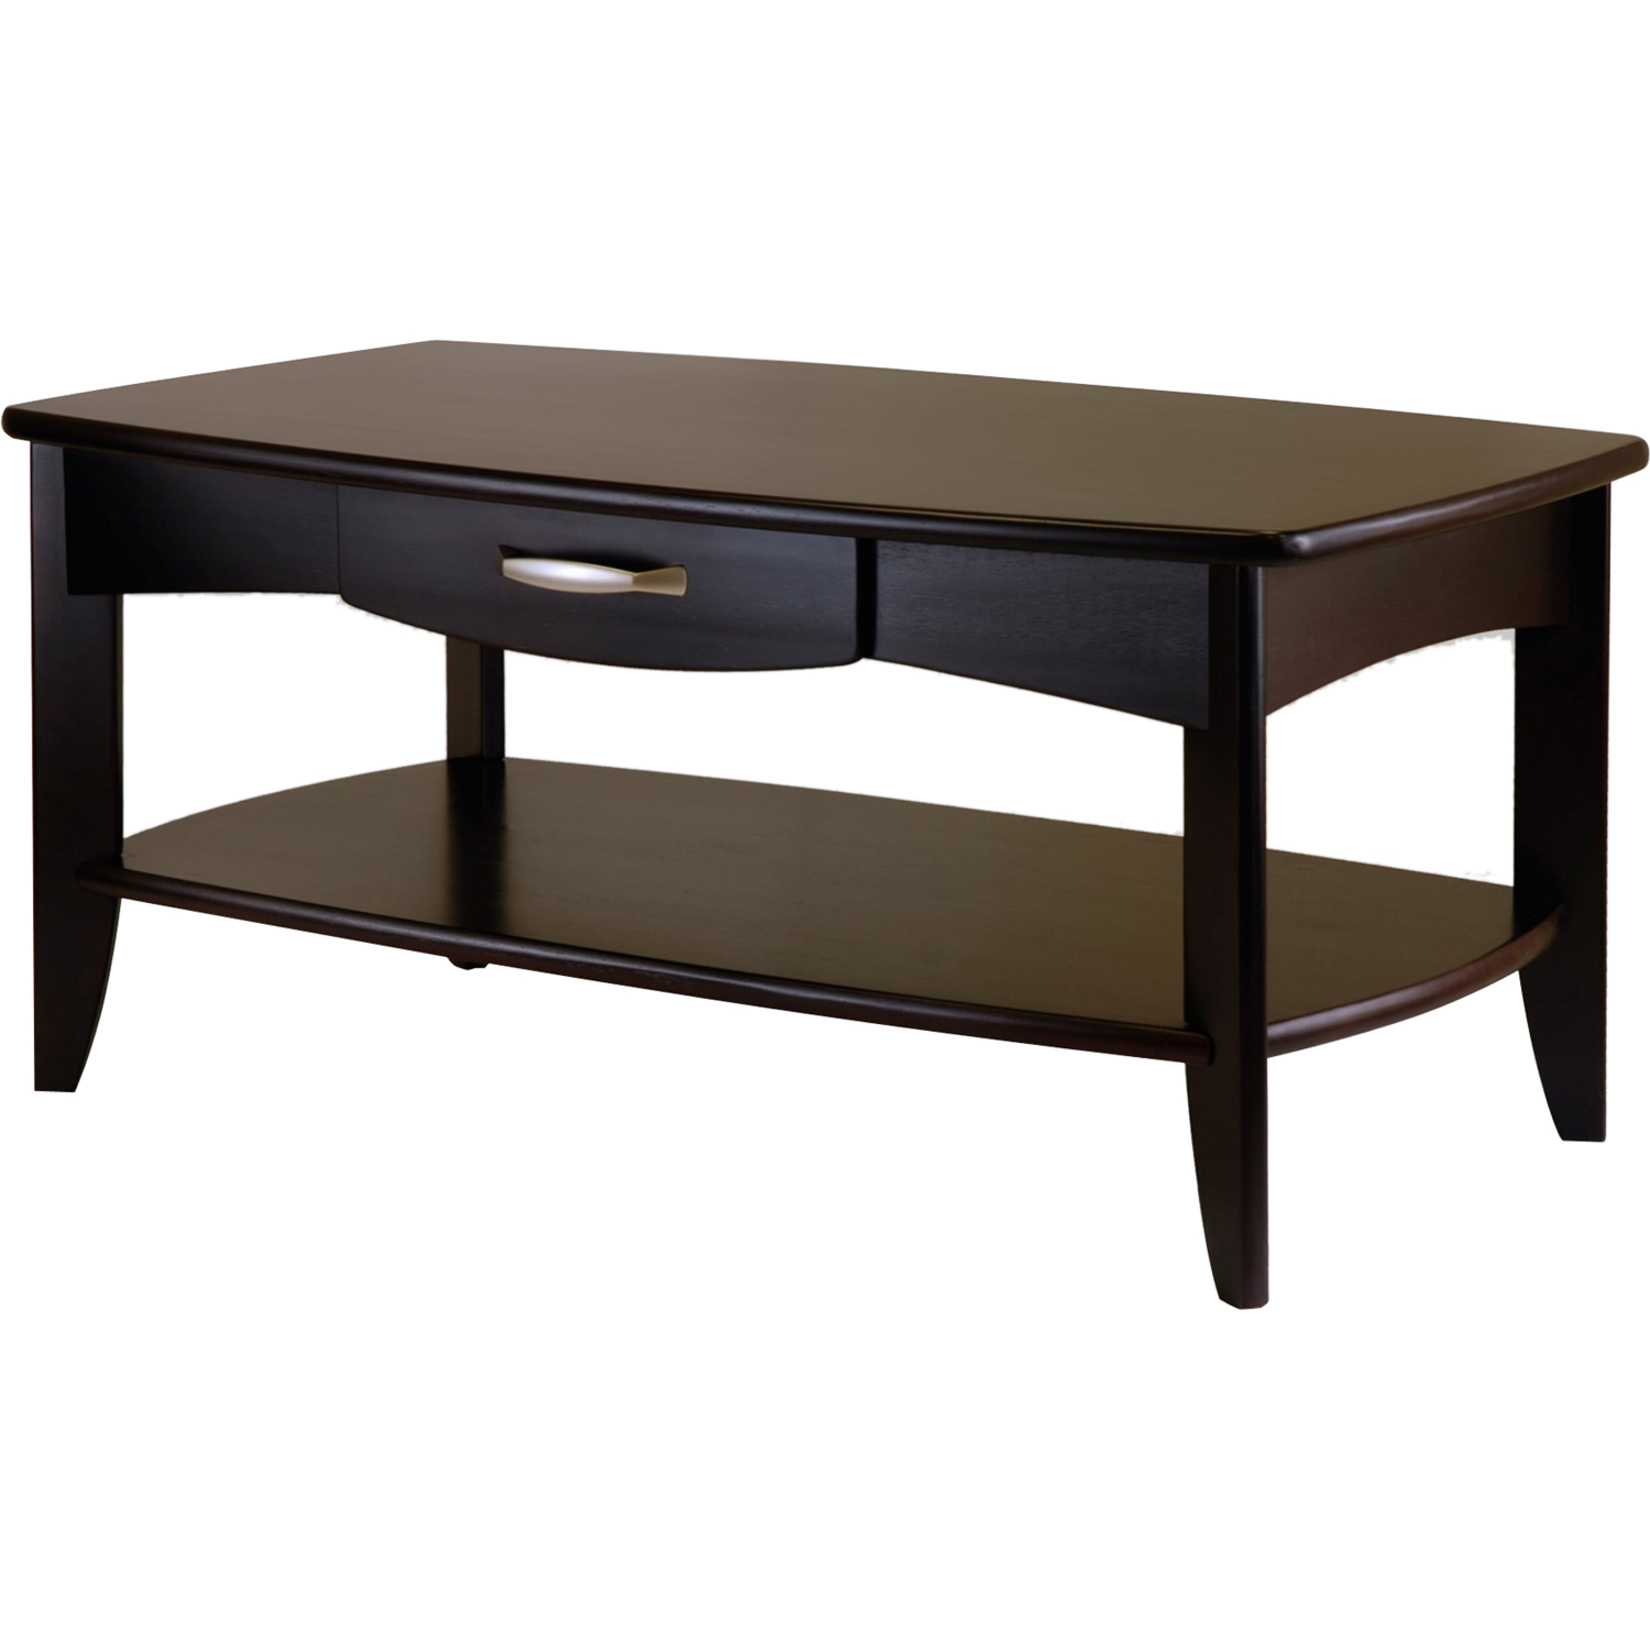 Winsome Wood Danica Coffee Table with Drawer, Espresso Finish - image 1 of 1